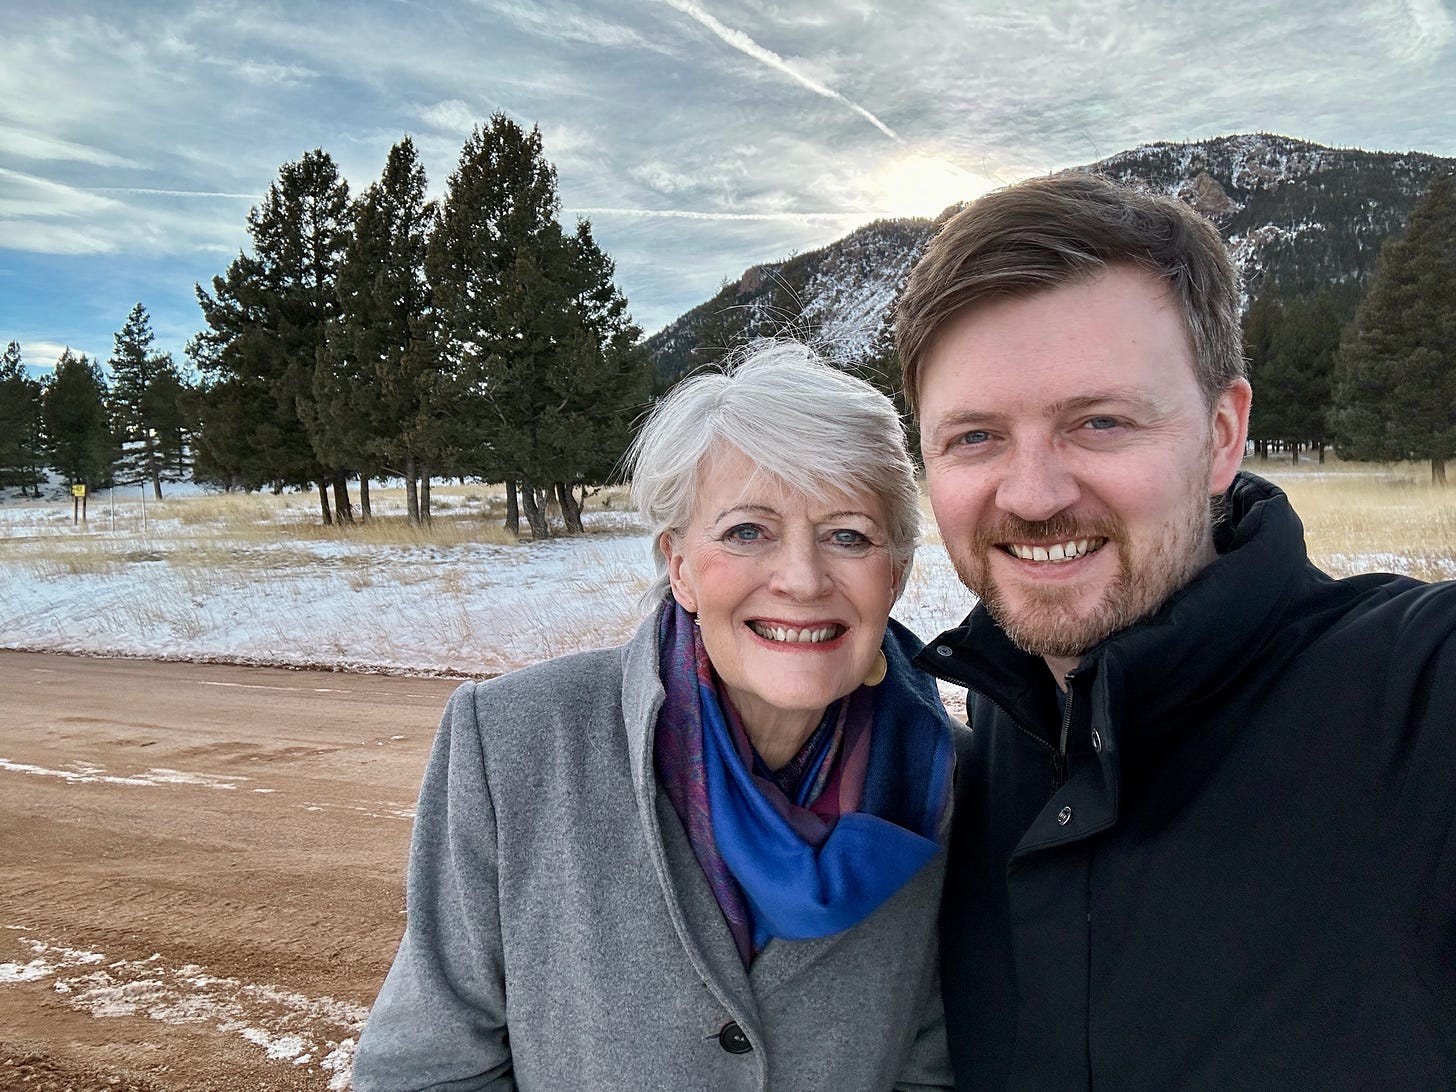 A snapshot of my mother and me in front of pine trees and a snowy mountain in the background.